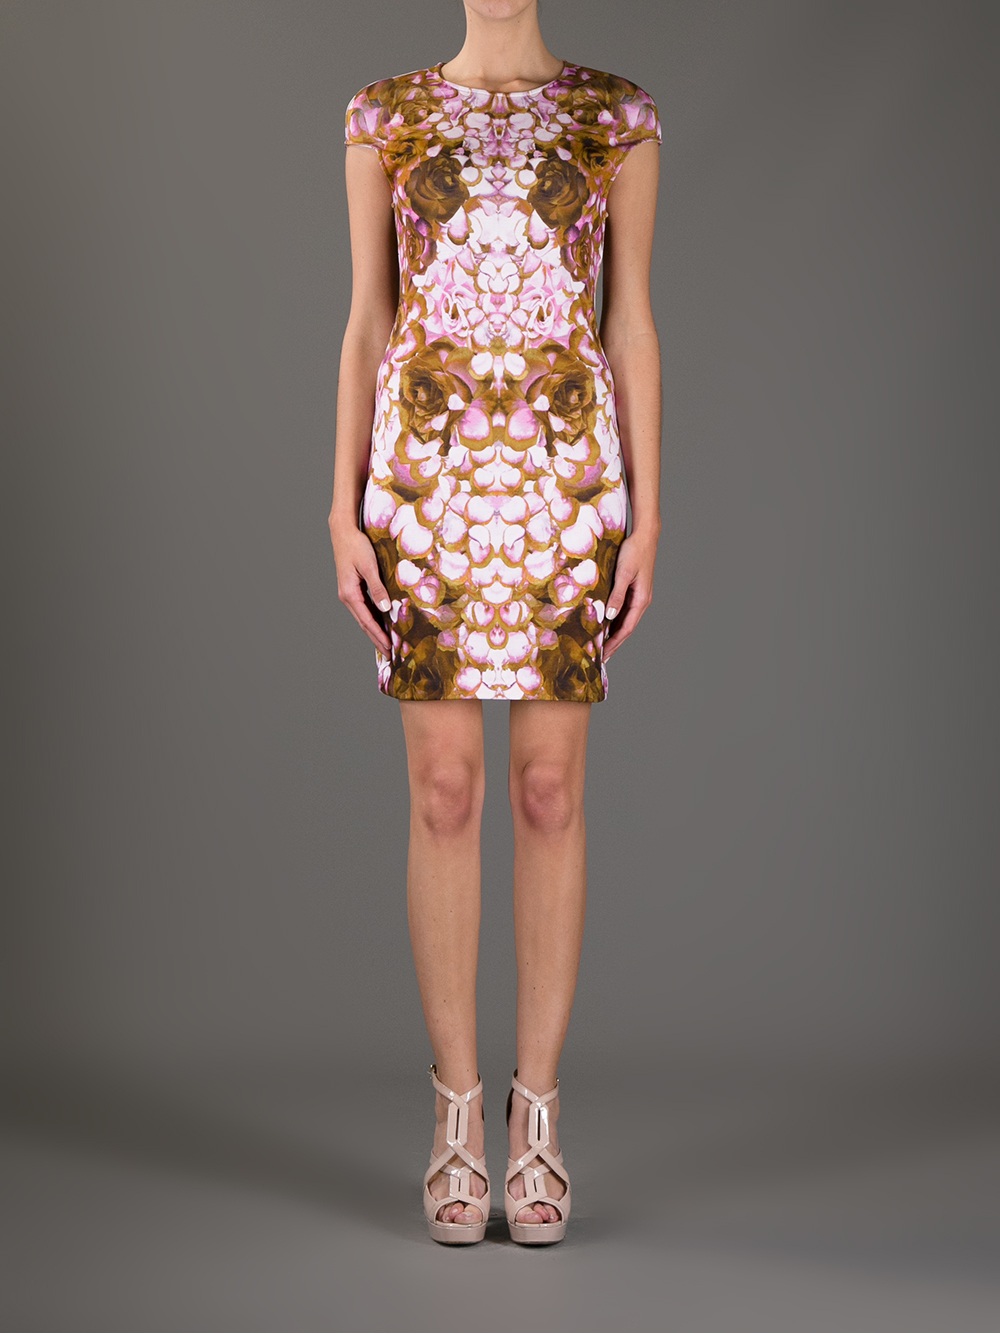 Mcq alexander mcqueen Rose Print Fitted Dress in Pink (rose) | Lyst